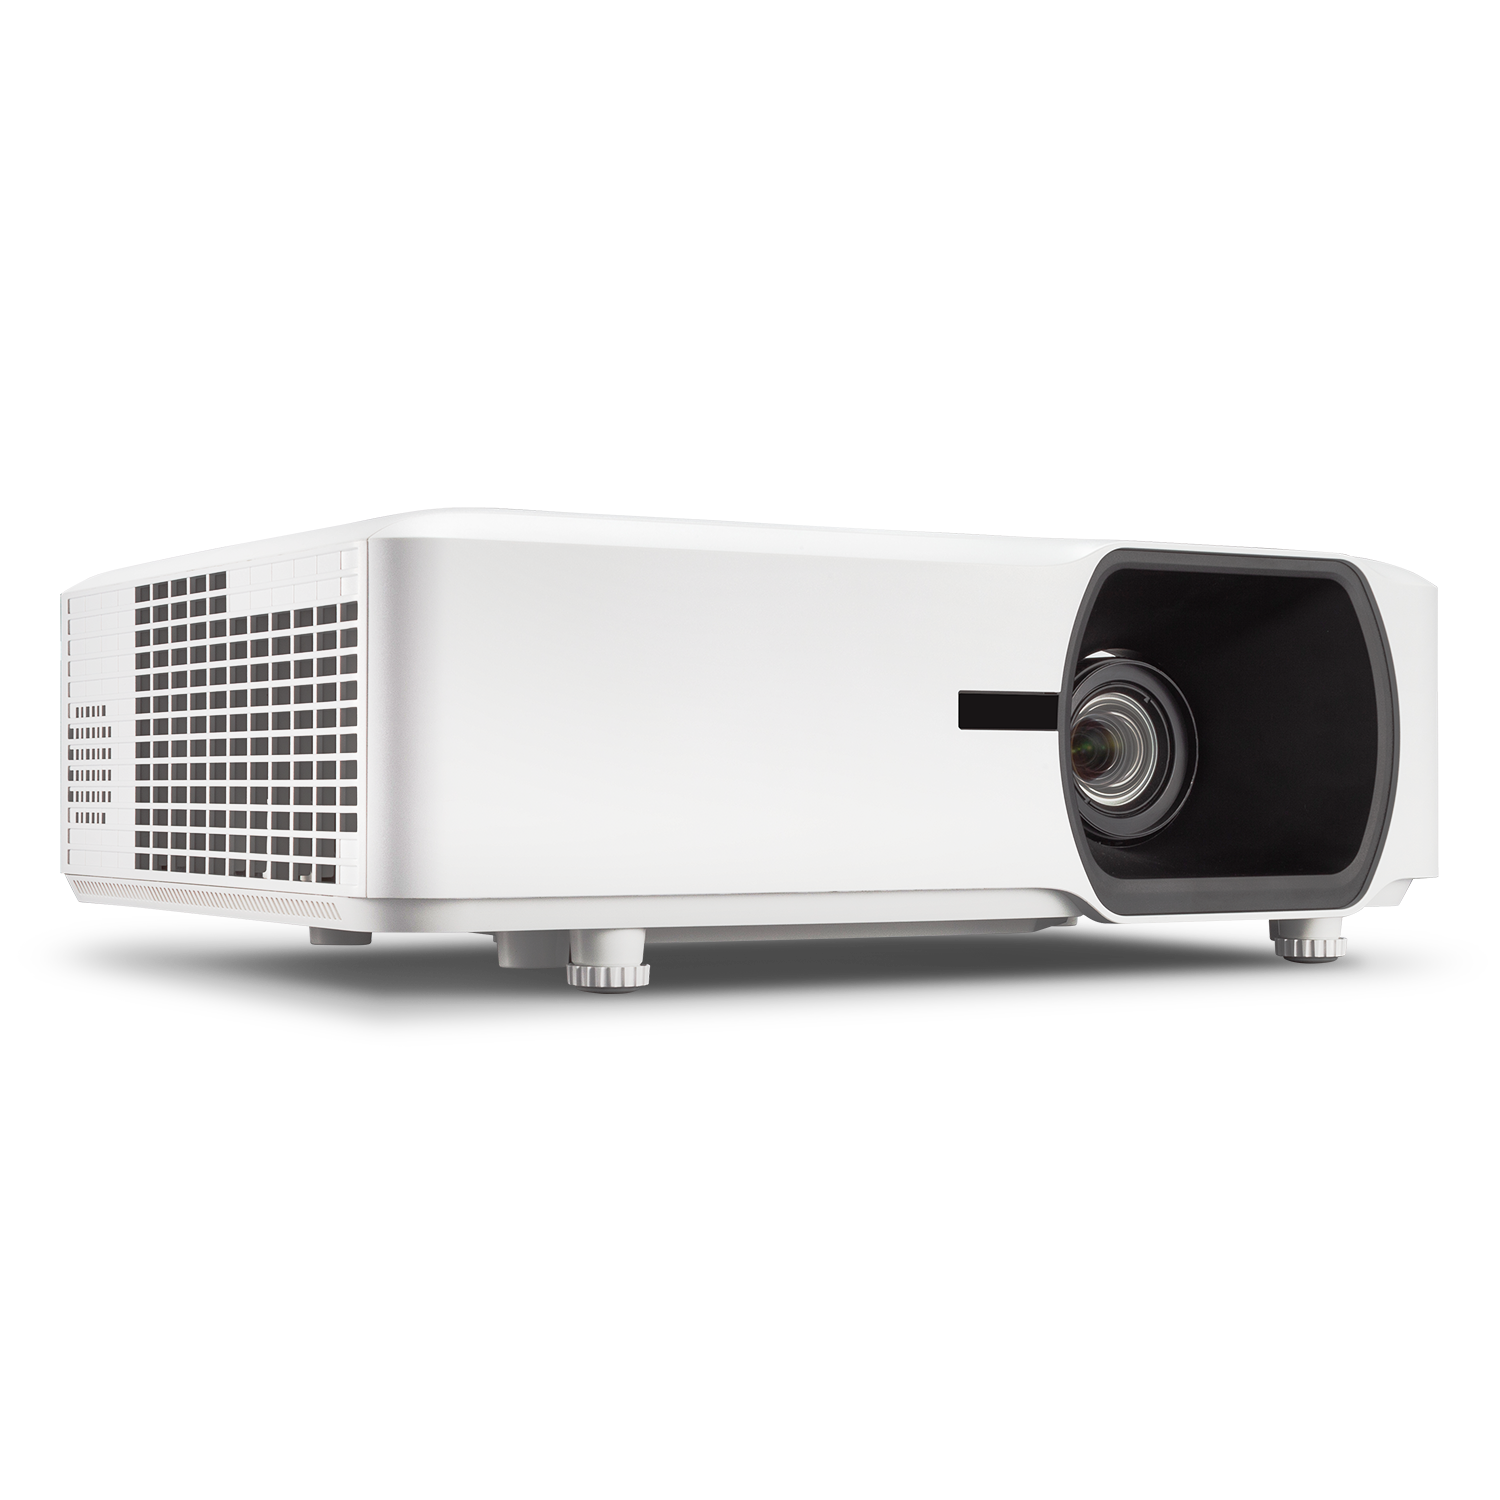 ViewSonic LS750WU 5000 Lumens WUXGA Networkable Laser Projector with 1.3x Optical Zoom Vertical Horizontal Keystone and Lens Shift for Large Venues - image 4 of 6